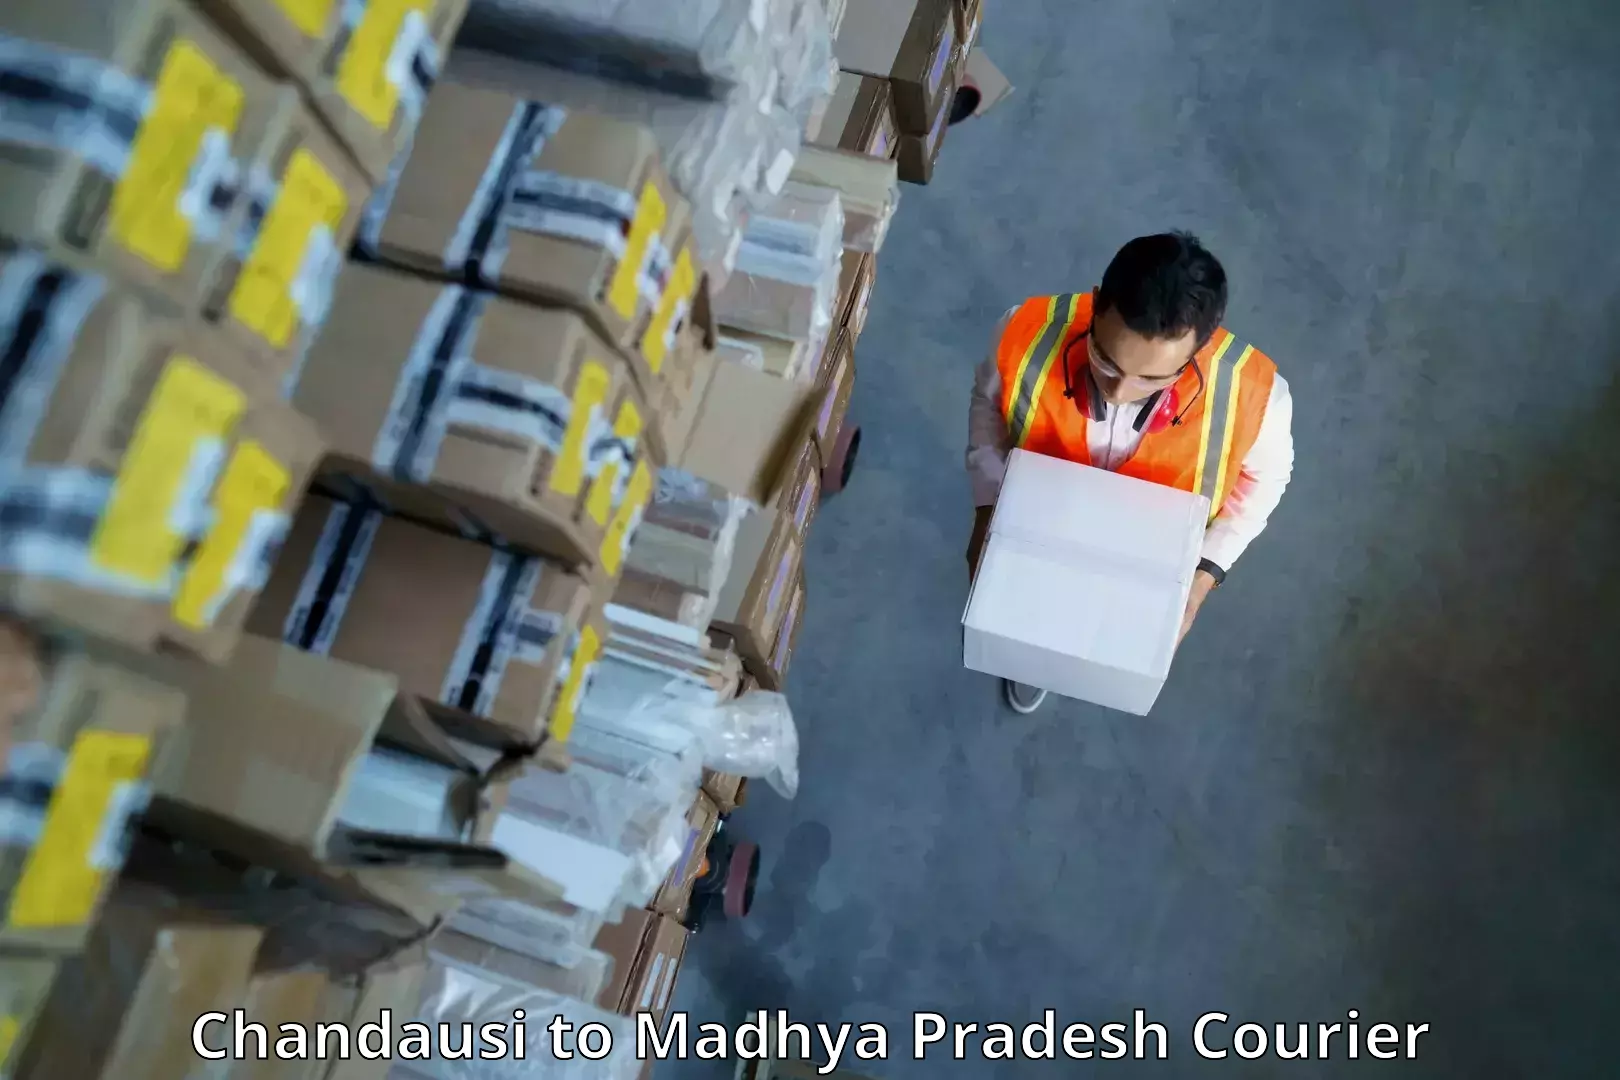 Efficient courier operations Chandausi to Bareli